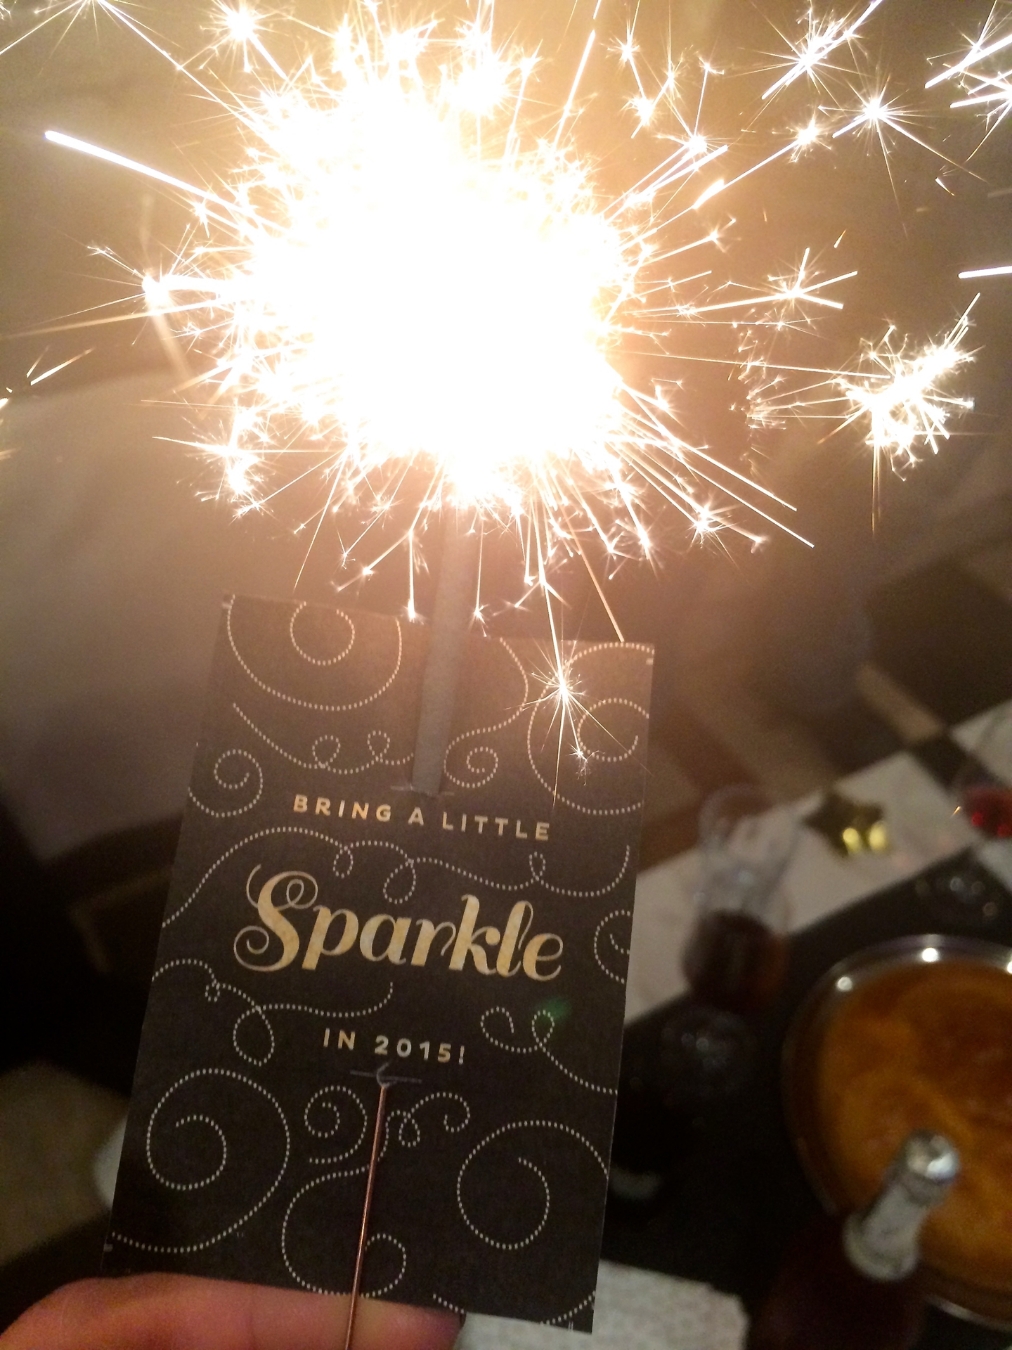 Let's sparkle this year!